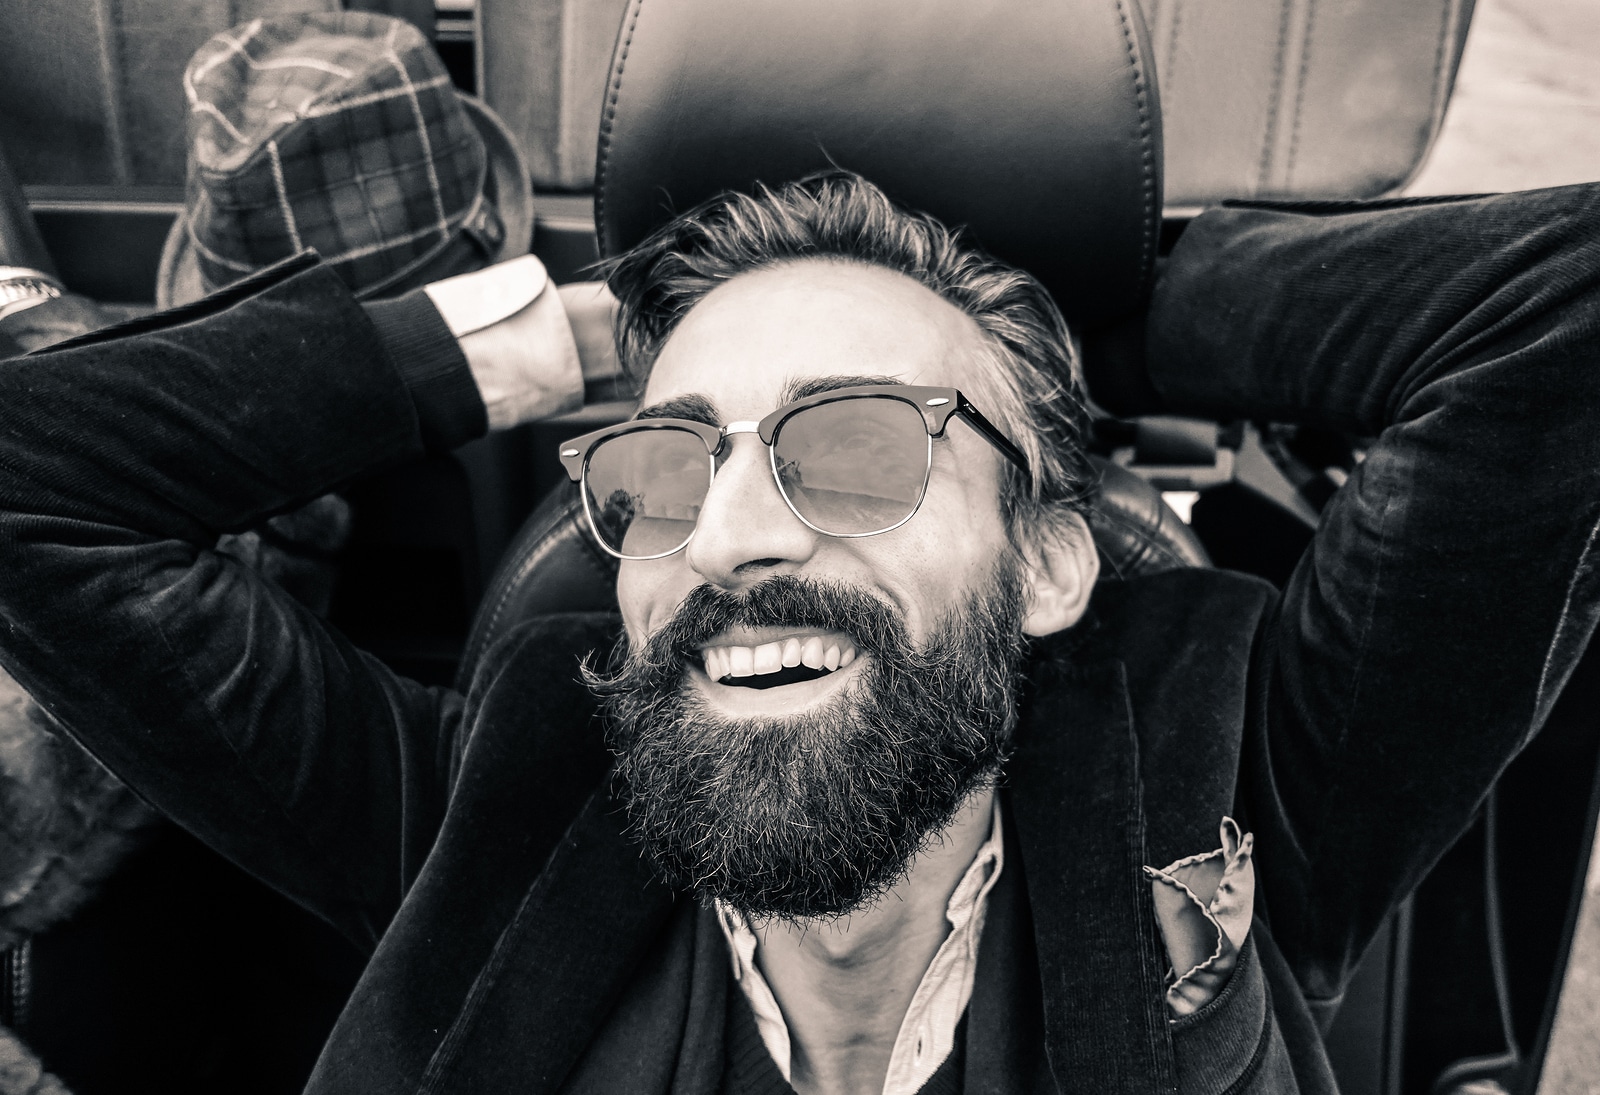 Fashion portrait of young bearded man ready for road trip - Cheerful hipster guy sitting in car lokking the sky - Black and white editing - Soft focus on beard - Warm vintage retro filter